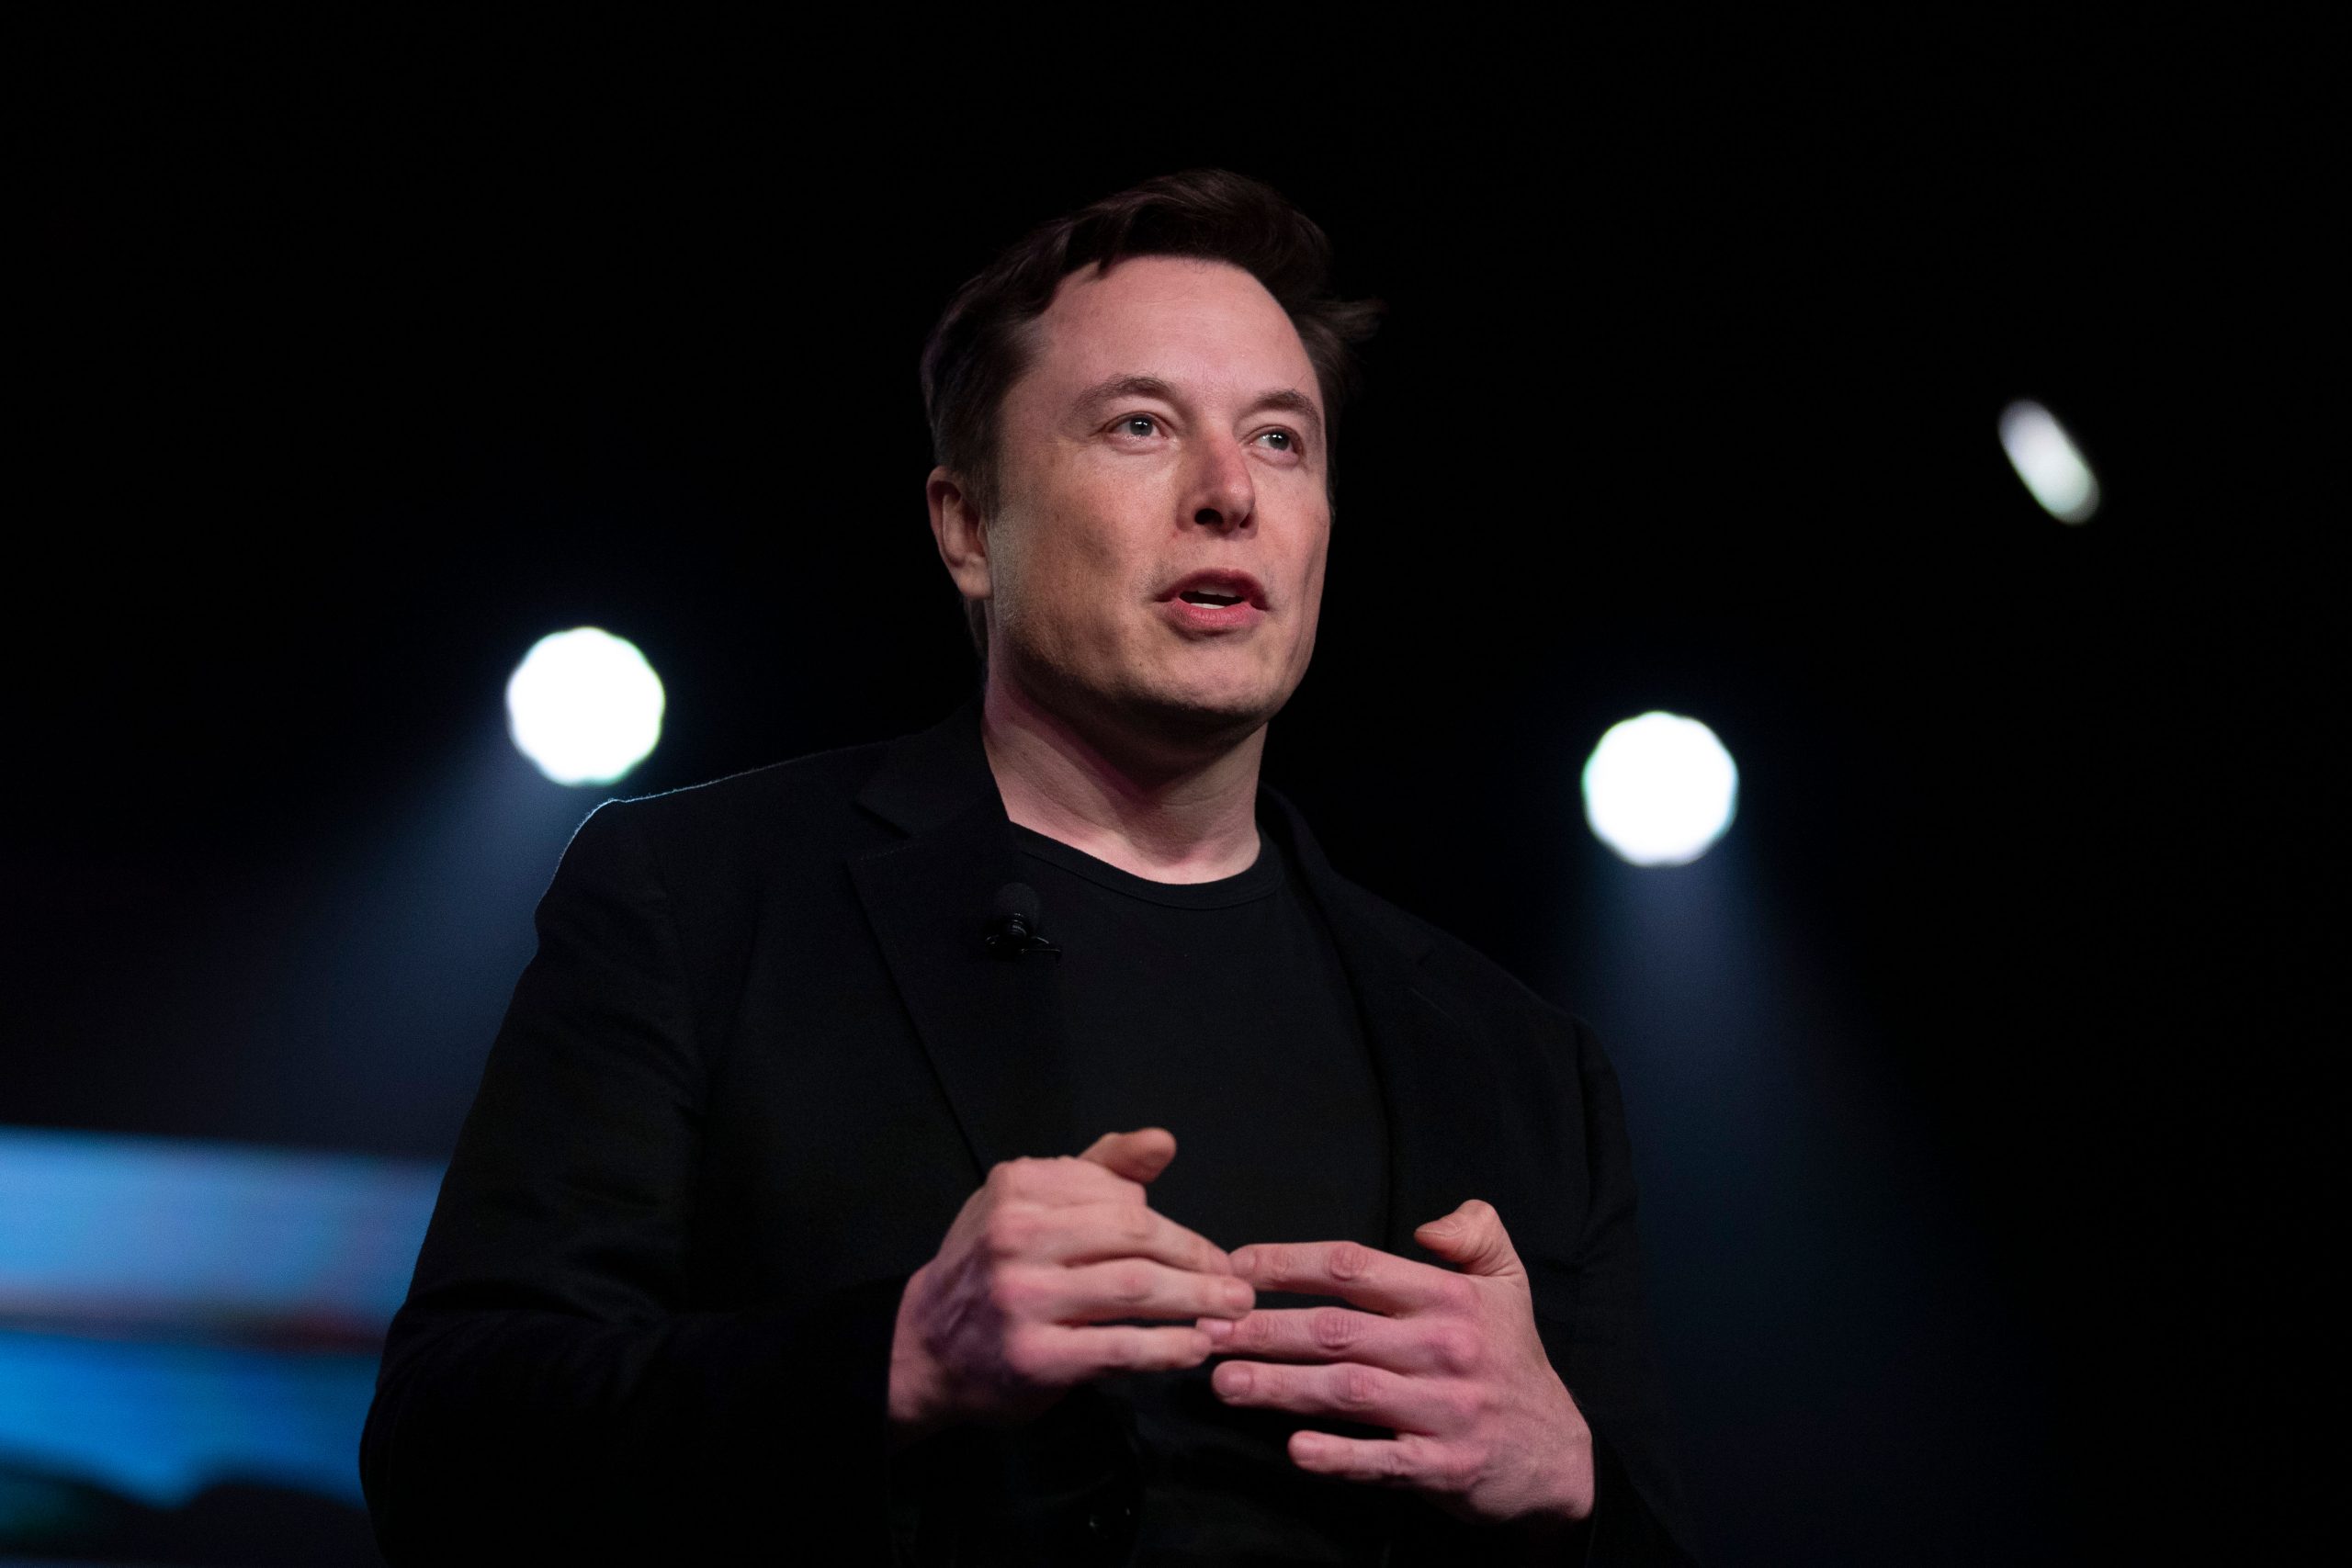 Elon Musk made $156 million by violating SEC laws: Reports